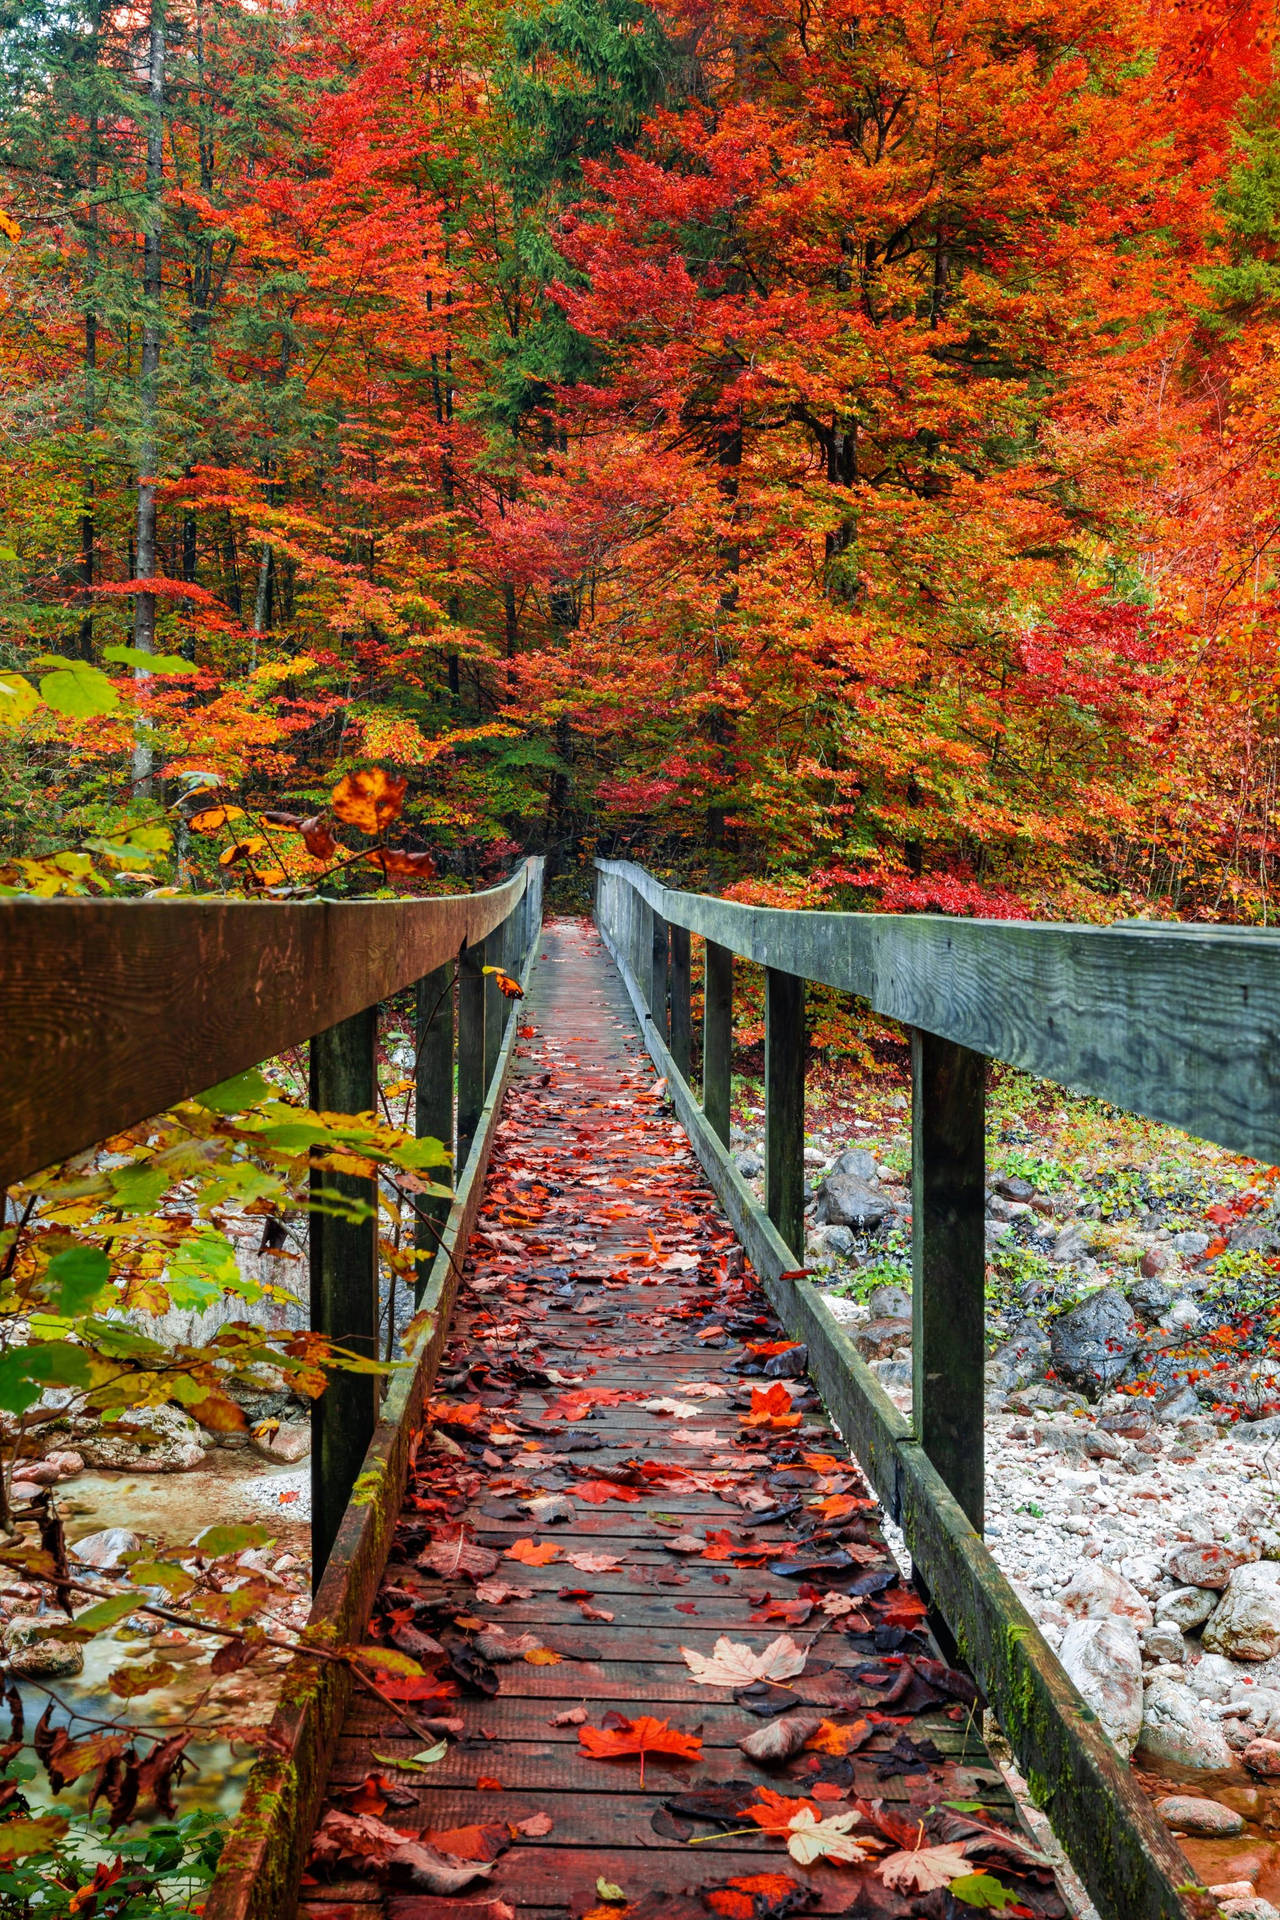 Warm Fall Aesthetics: Mystical Autumn Bridge Surrounded by Lush Green and Red Foliage on iPhone Wallpaper